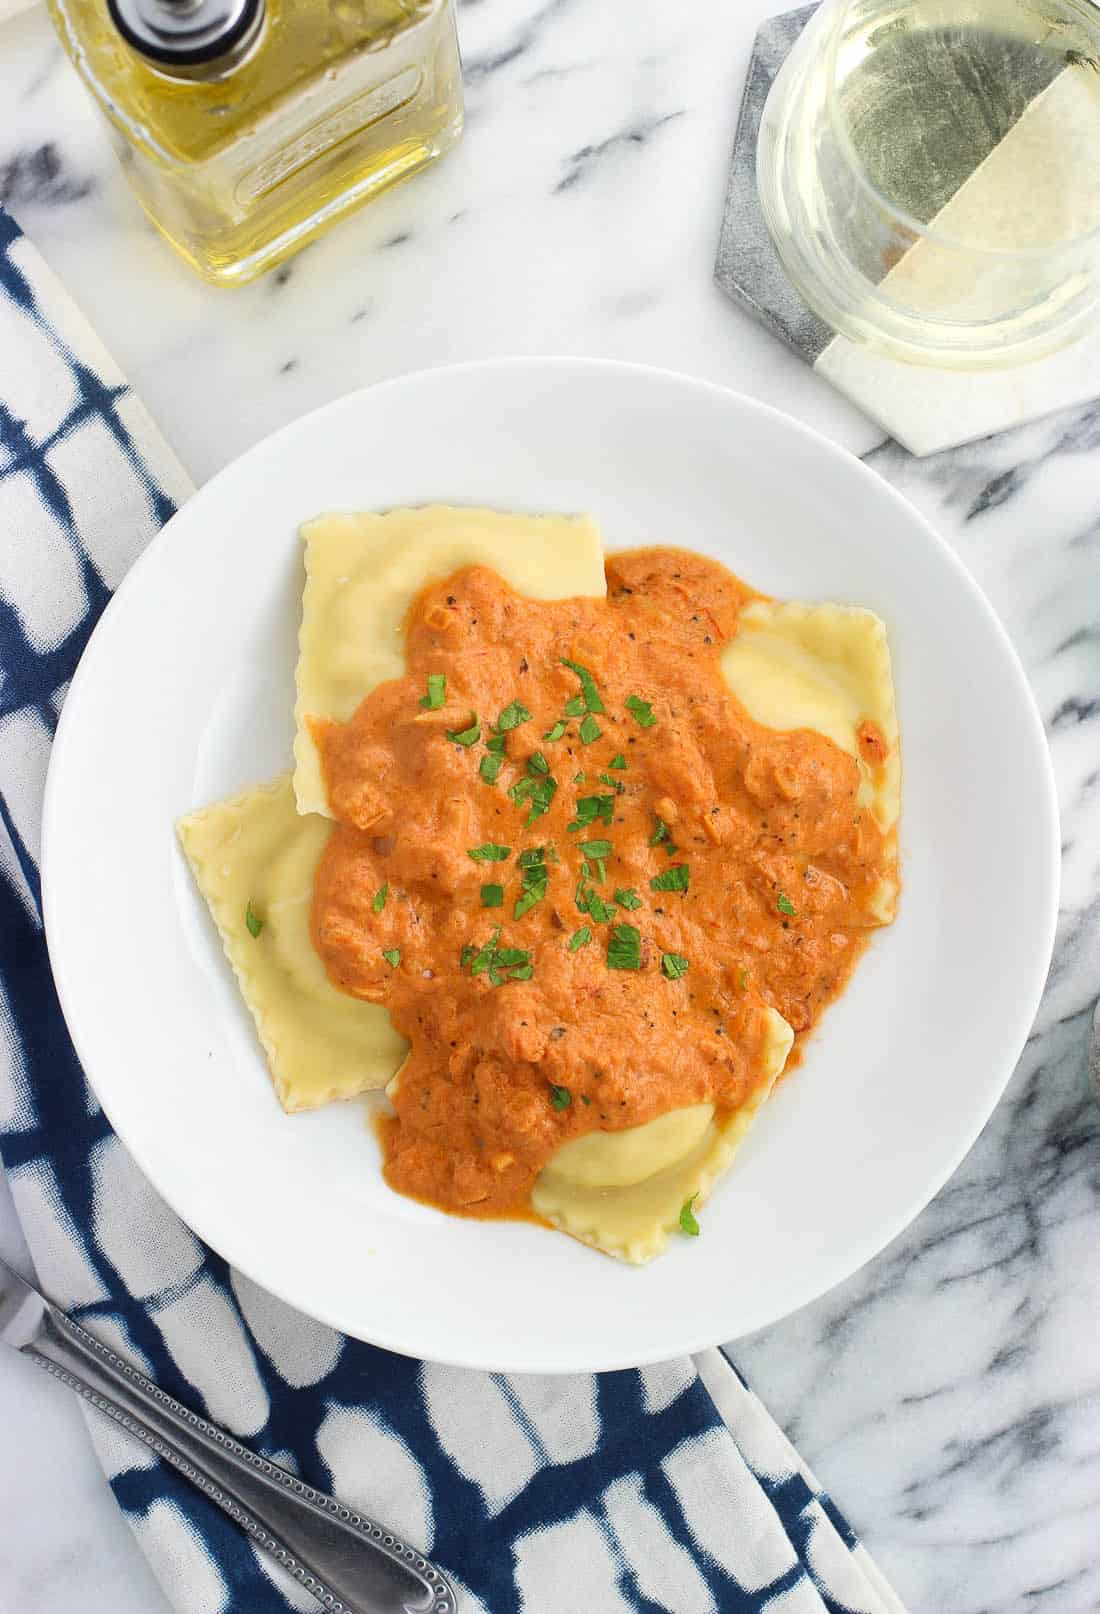 A serving of vodka sauce over ravioli in a shallow bowl.